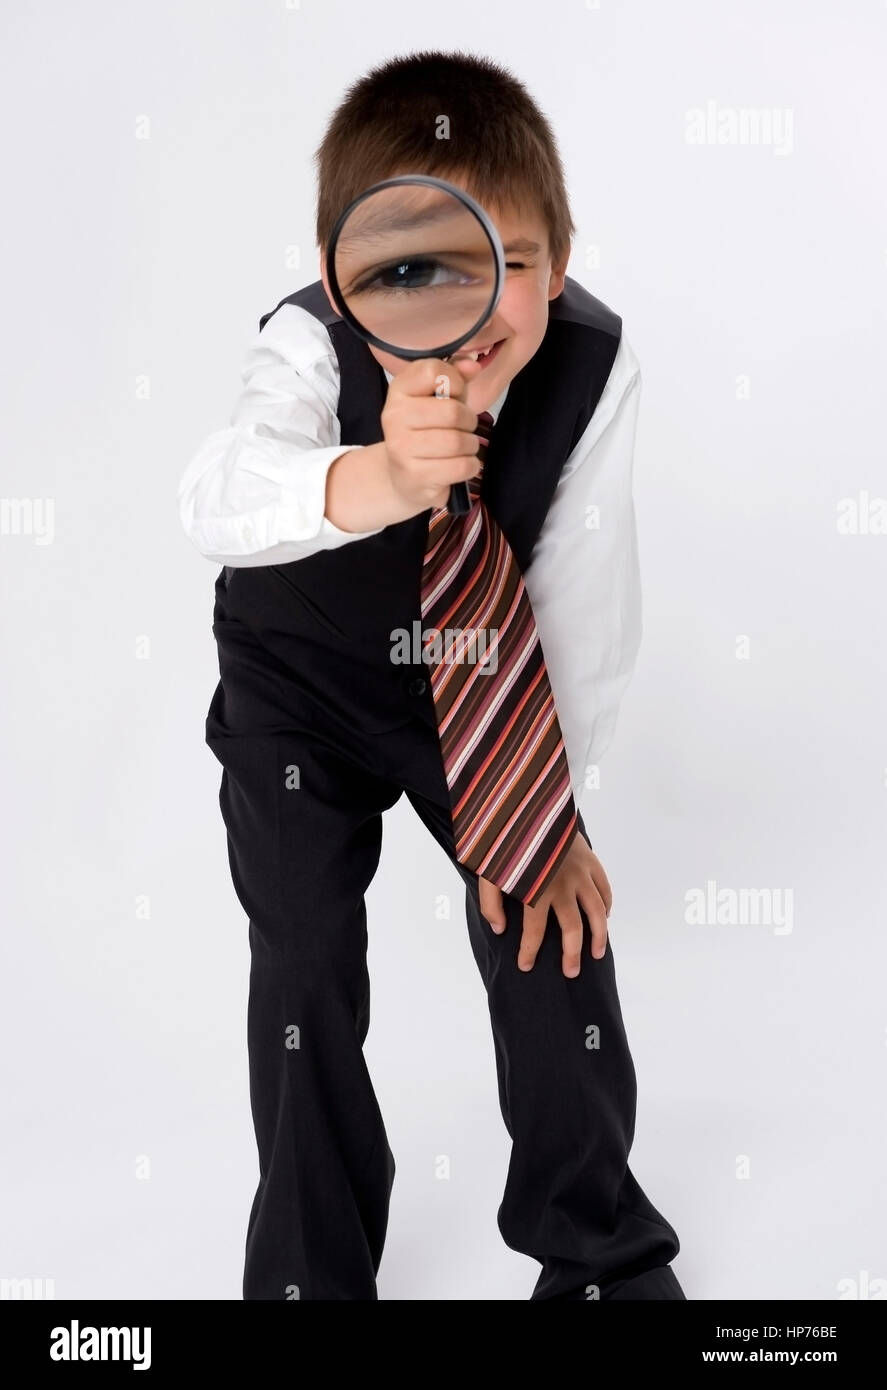 Model released, Junge, 8, im Businesslook mit Lupe - young businessman with loupe searching for something Stock Photo